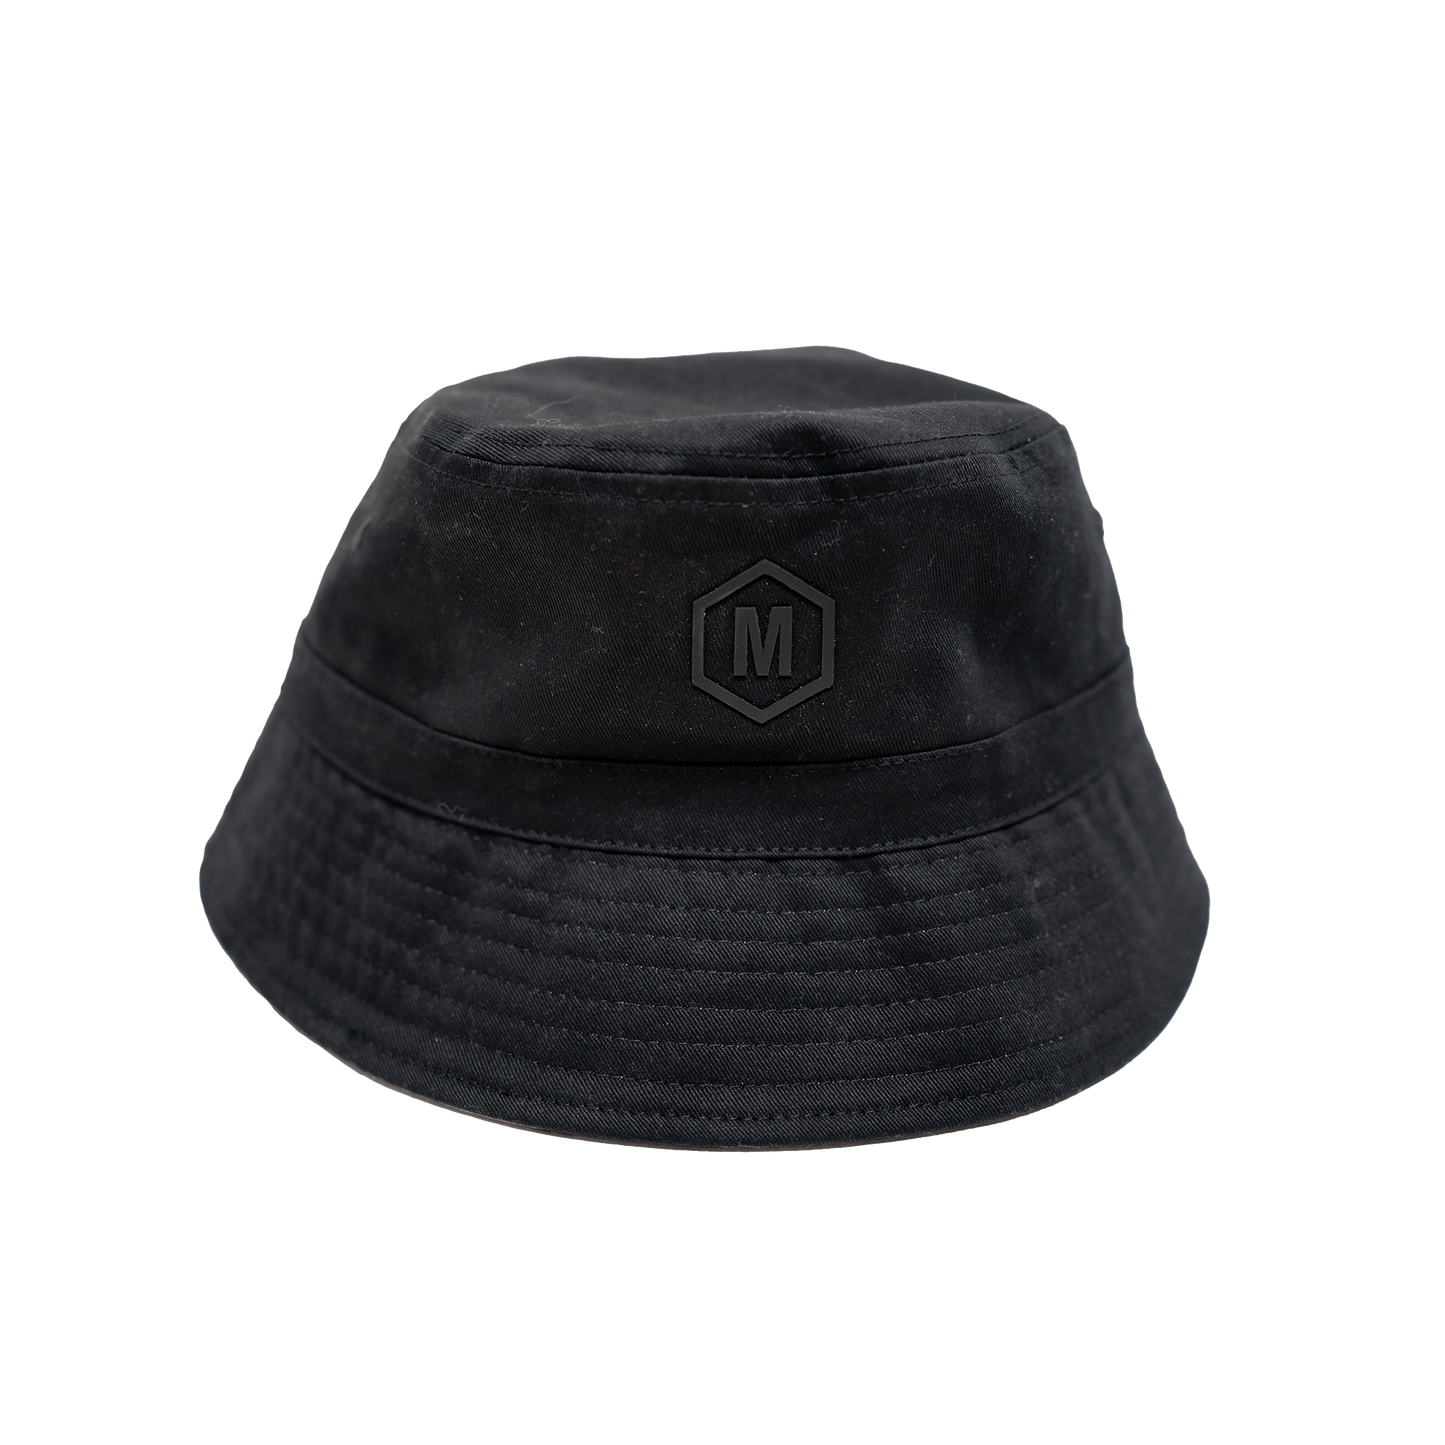 The Black Collection Bucket Hat